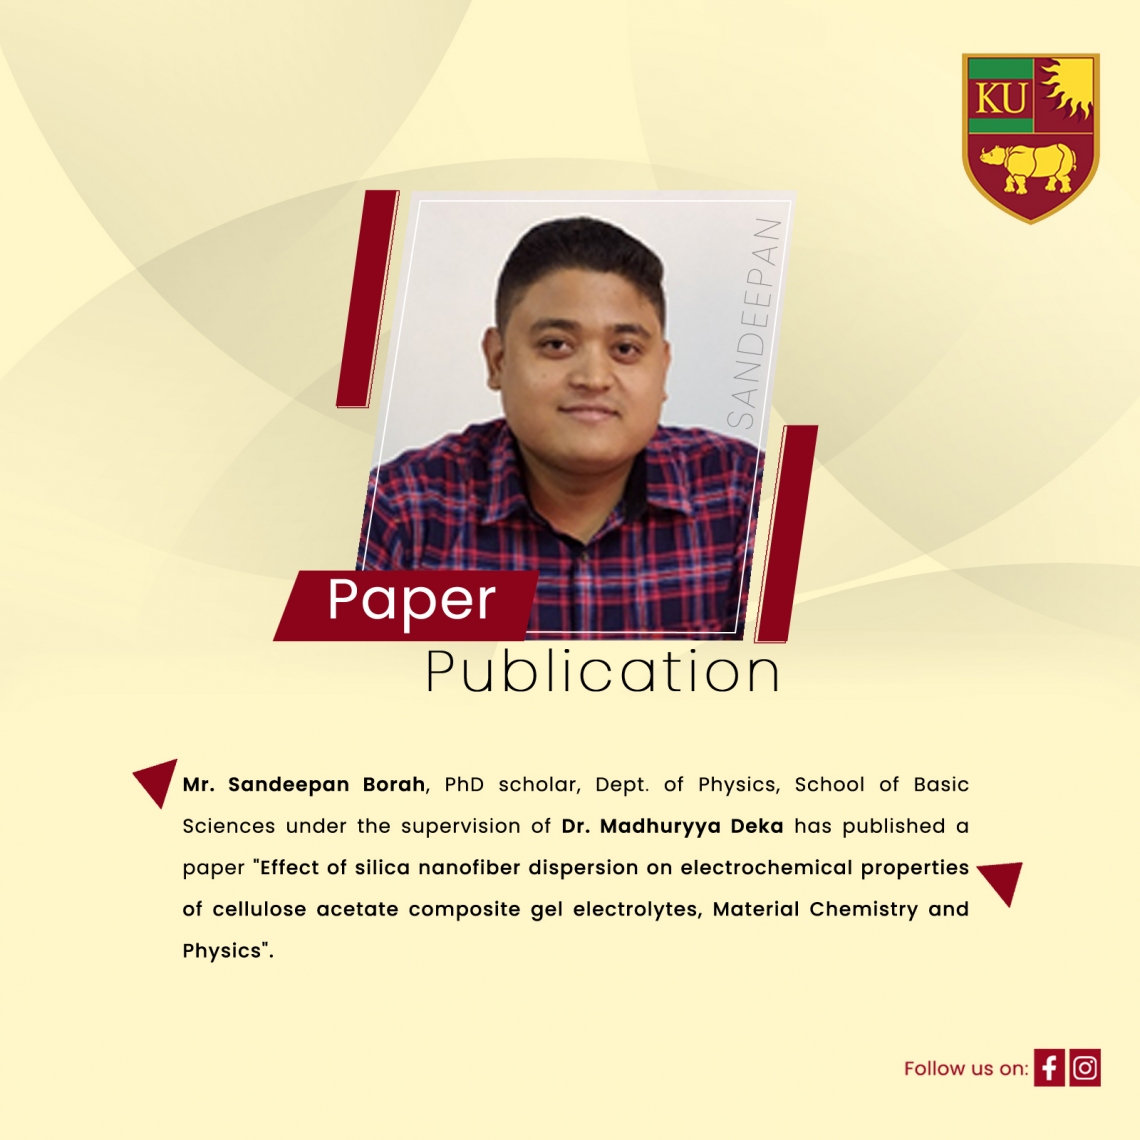 Mr Sandipan Borah, PhD scholar for successfully publishing a paper titled, "Effect of silica nanofiber dispersion on electrochemical properties of cellulose acetate composite gel electrolytes, Material Chemistry and Physics"